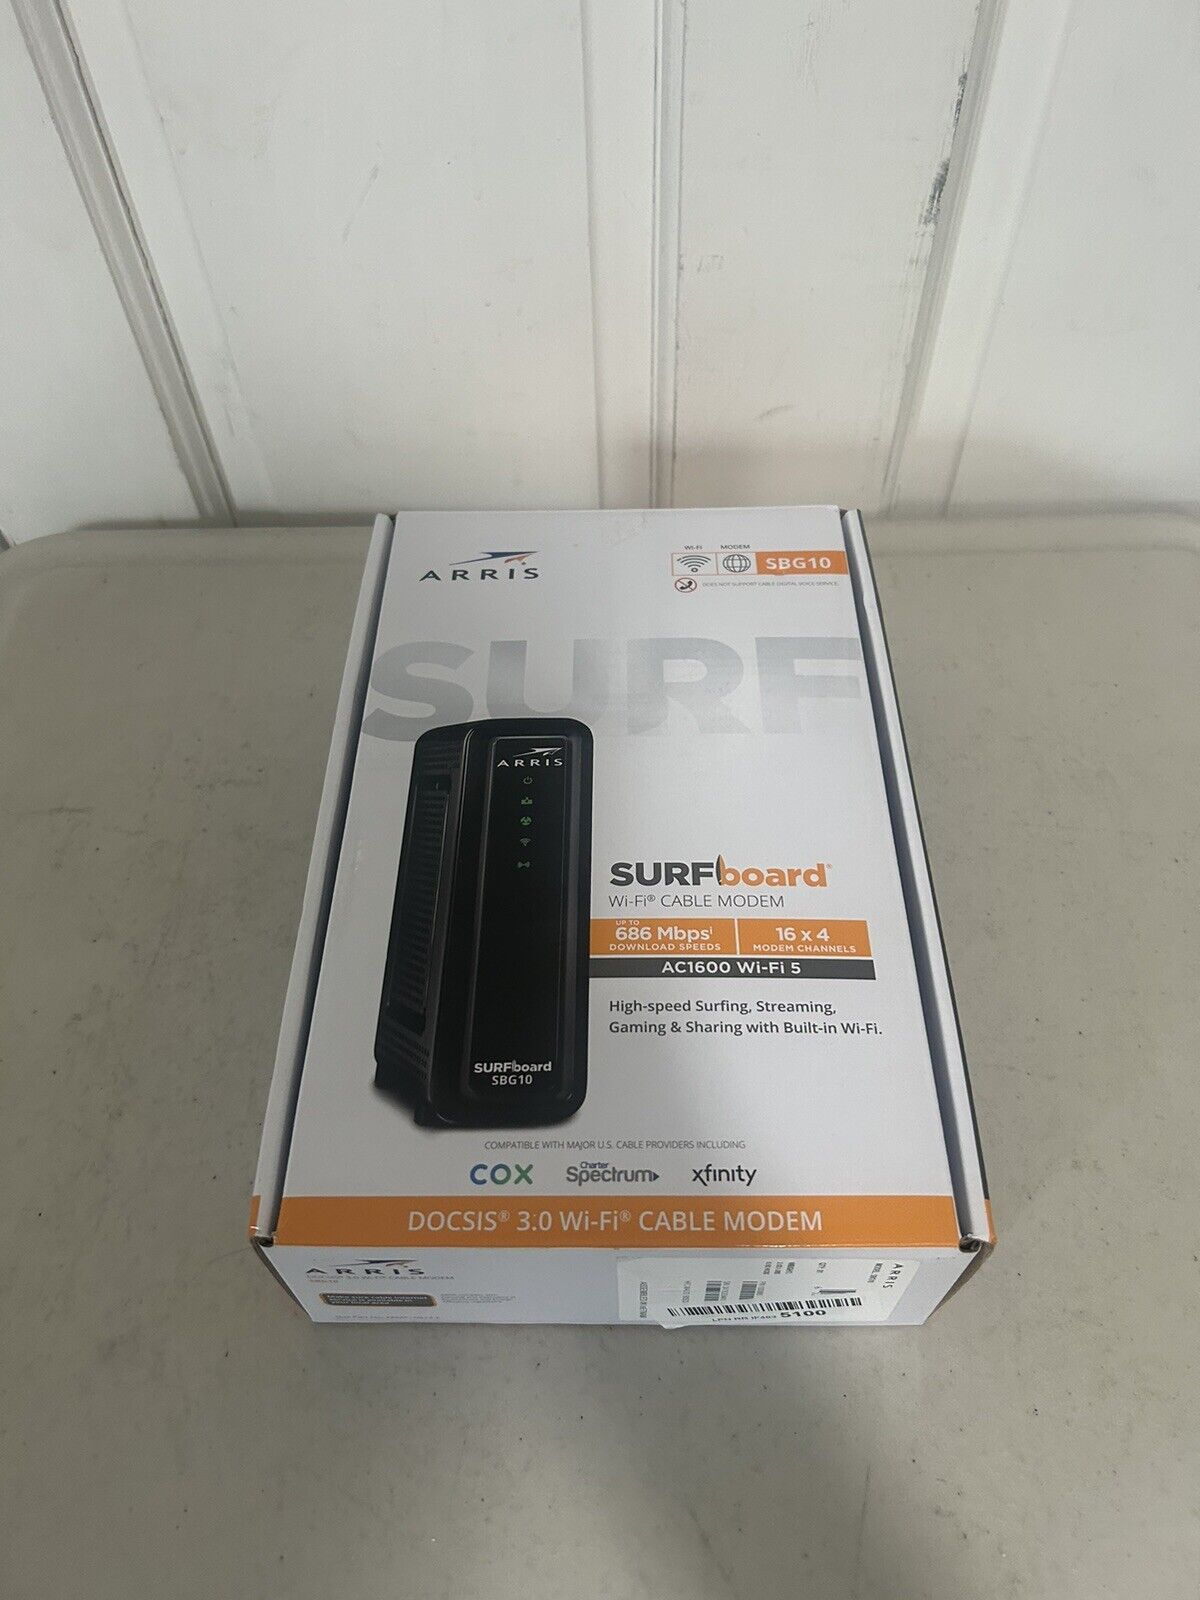 New Arris Surfboard Wi-Fi Cable Modem SBG10